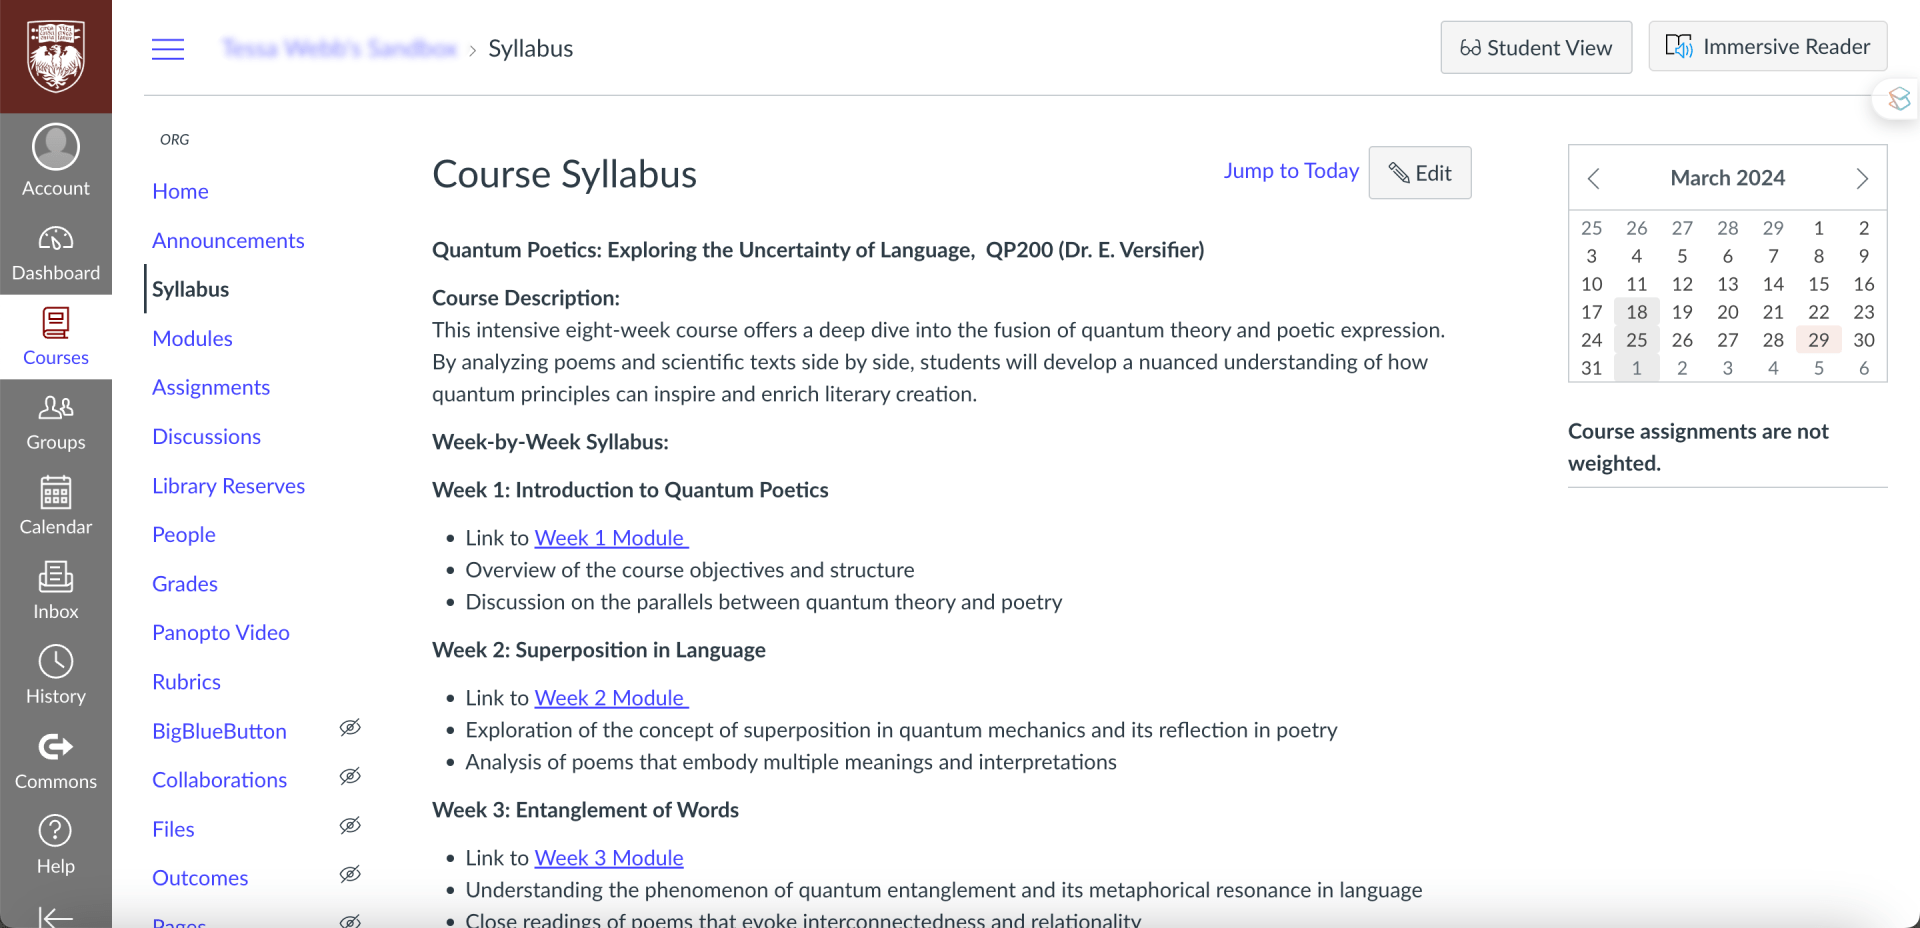 A course syllabus on a canvas page shows a course description and a week by week syllabus with links to modules for each week. 